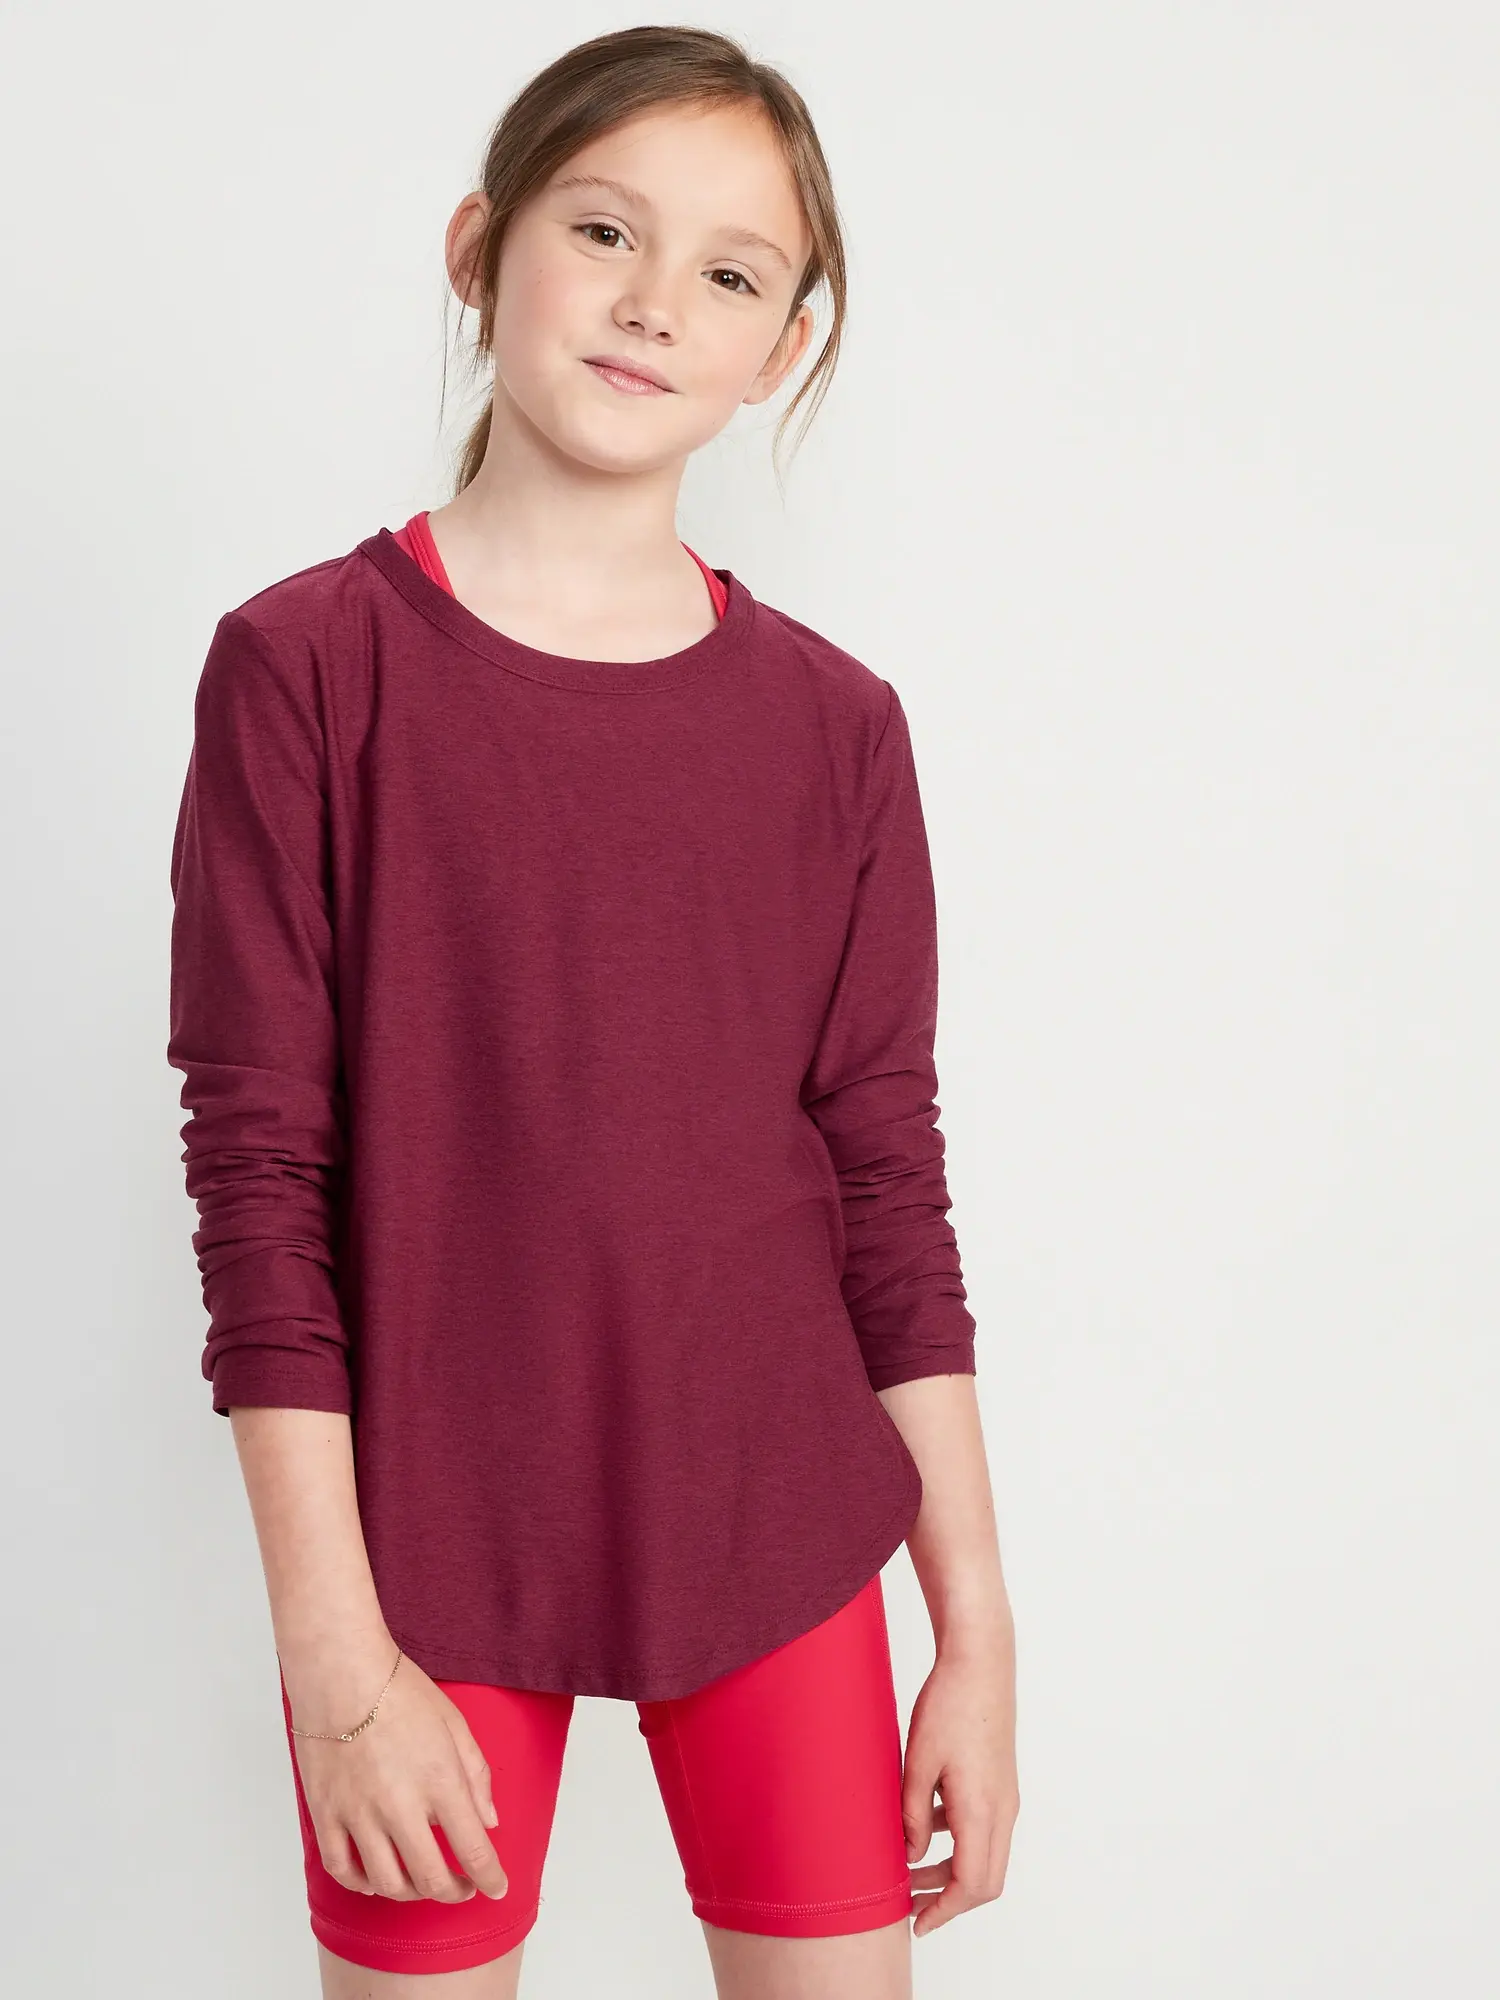 Old Navy Cloud 94 Soft Go-Dry Long-Sleeve T-Shirt for Girls red. 1